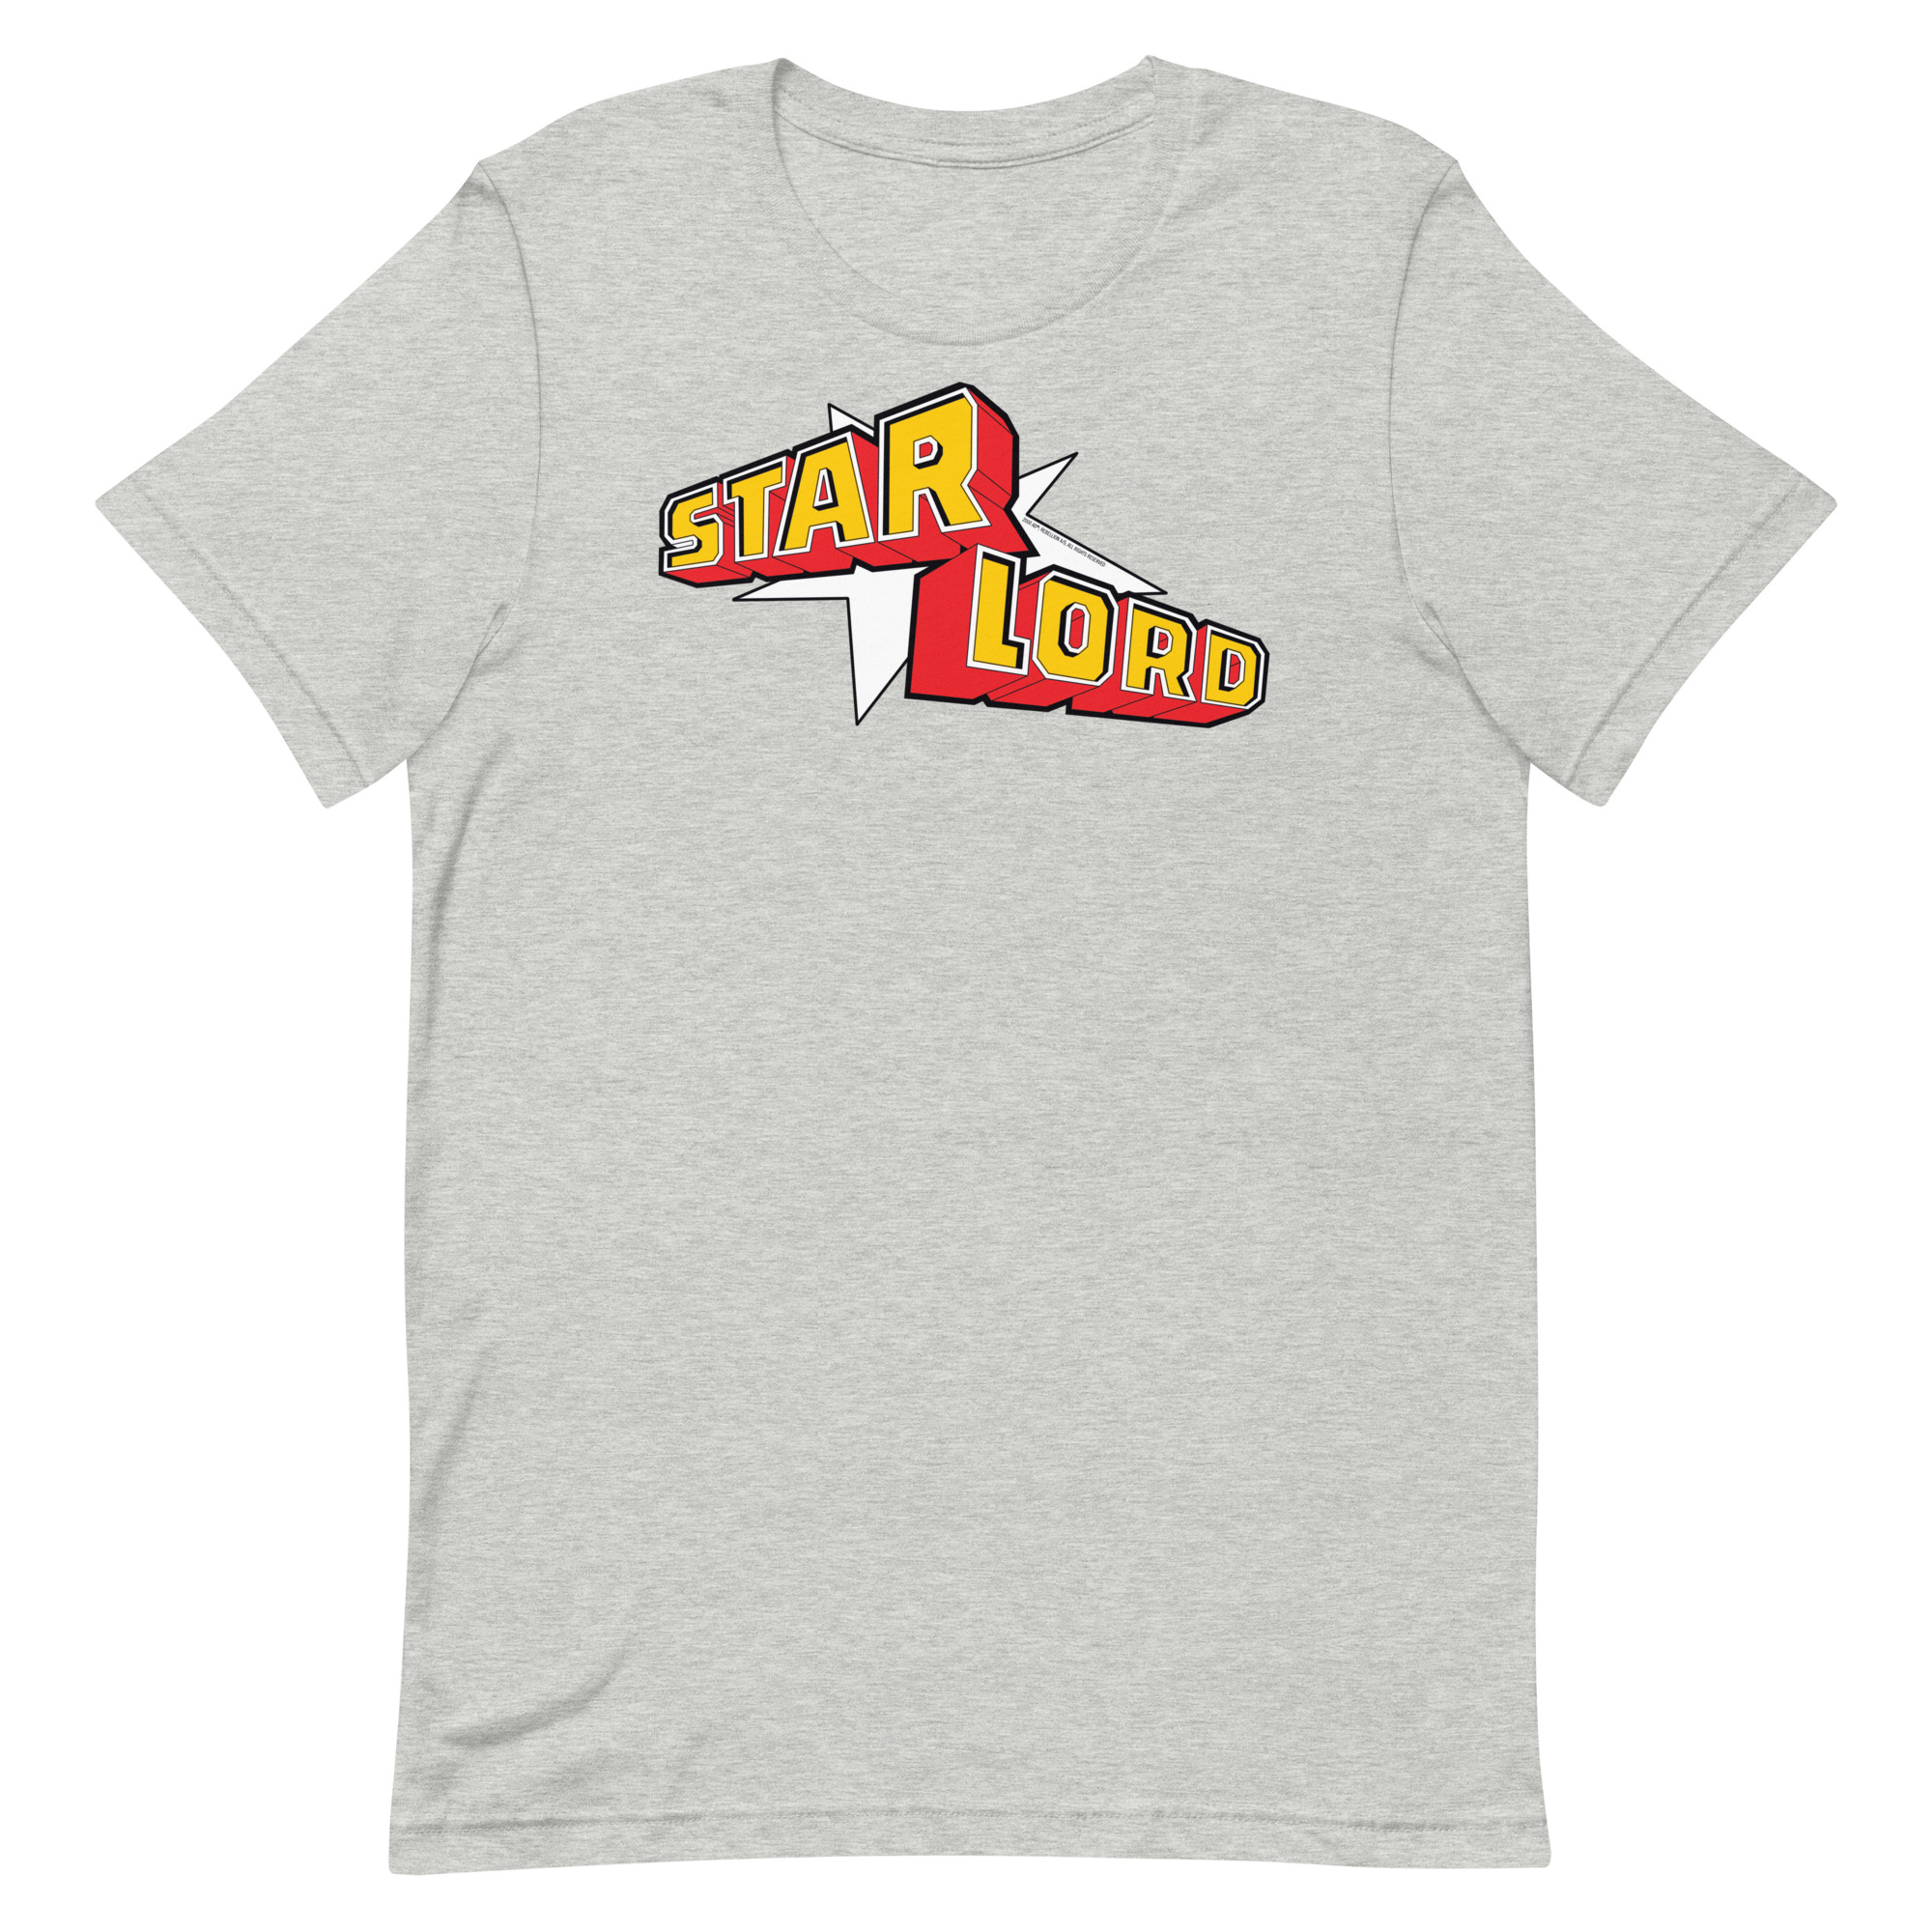 Image of a Athletic Heather coloured Star Lord t-shirt featuring a large Star Lord logo in the middle